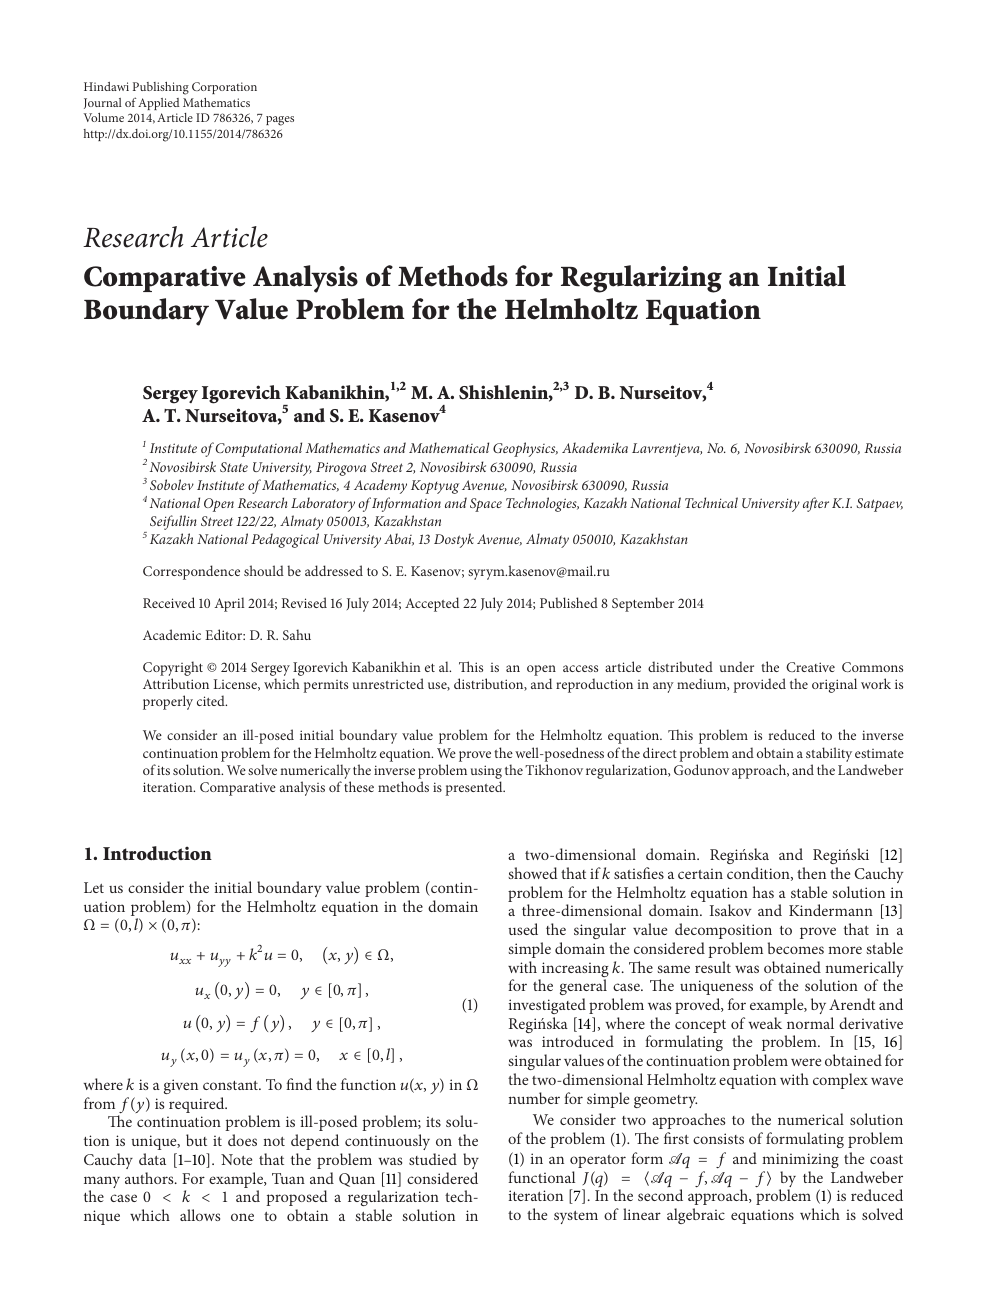 Comparative Analysis Of Methods For Regularizing An Initial Boundary Value Problem For The Helmholtz Equation Topic Of Research Paper In Mathematics Download Scholarly Article Pdf And Read For Free On Cyberleninka